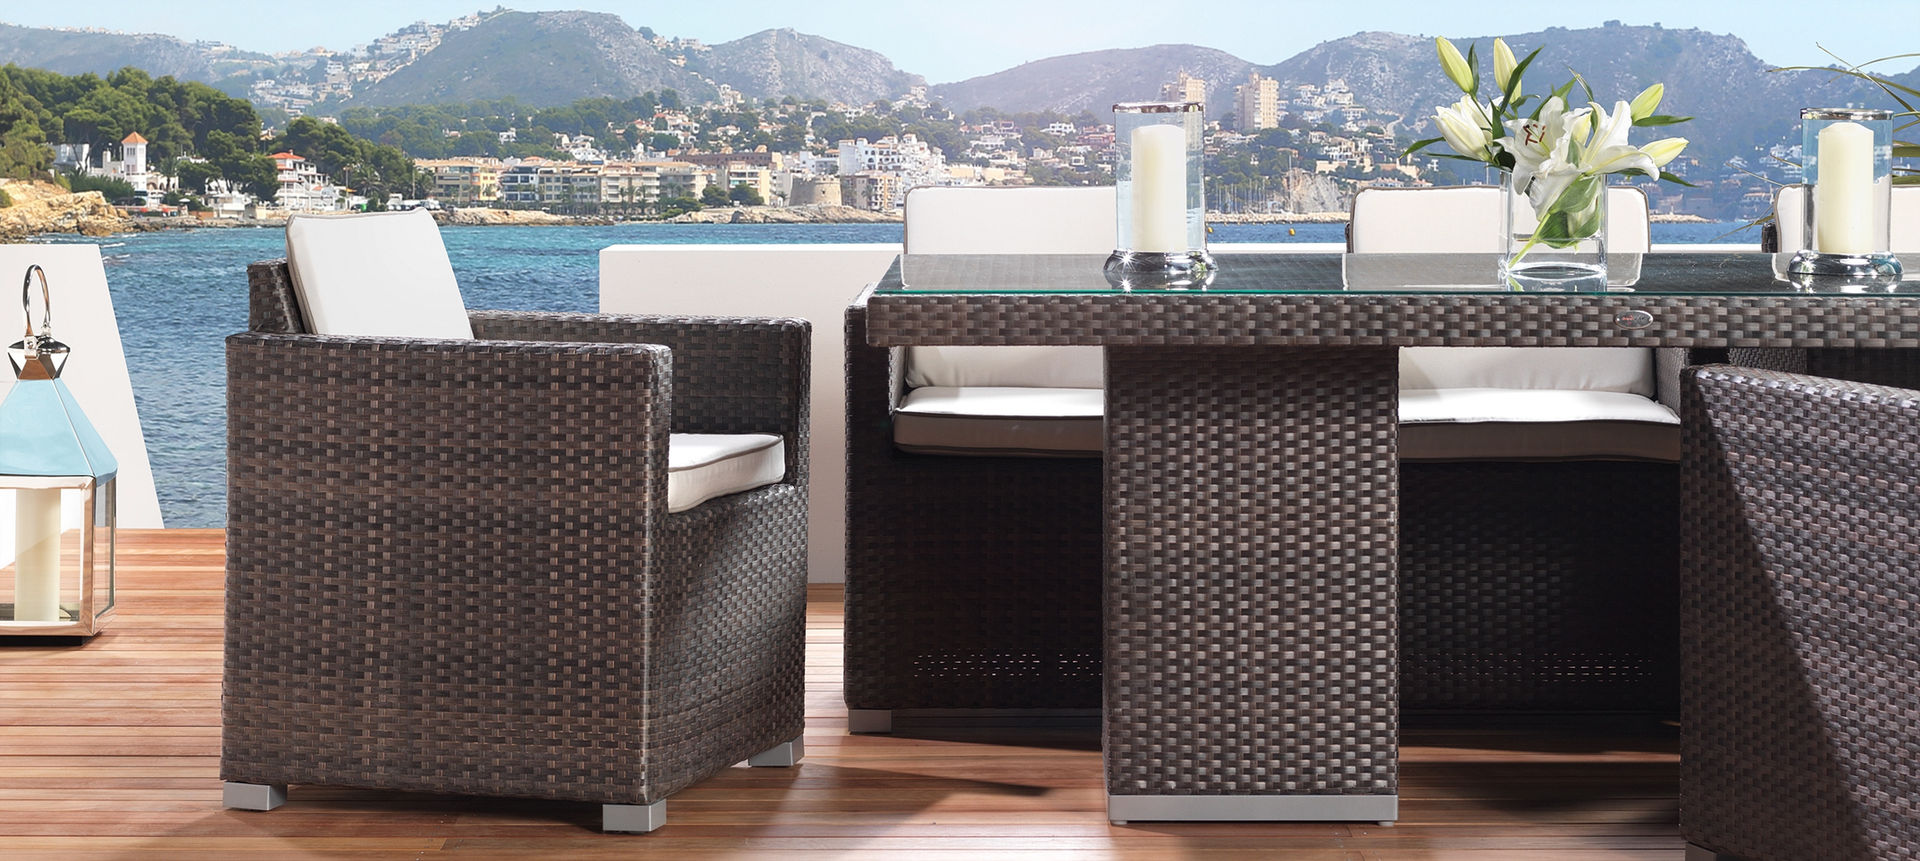 LuxDeco - The Riviera Collection - Dining Table LuxDeco Terrace Rattan/Wicker Turquoise Furniture